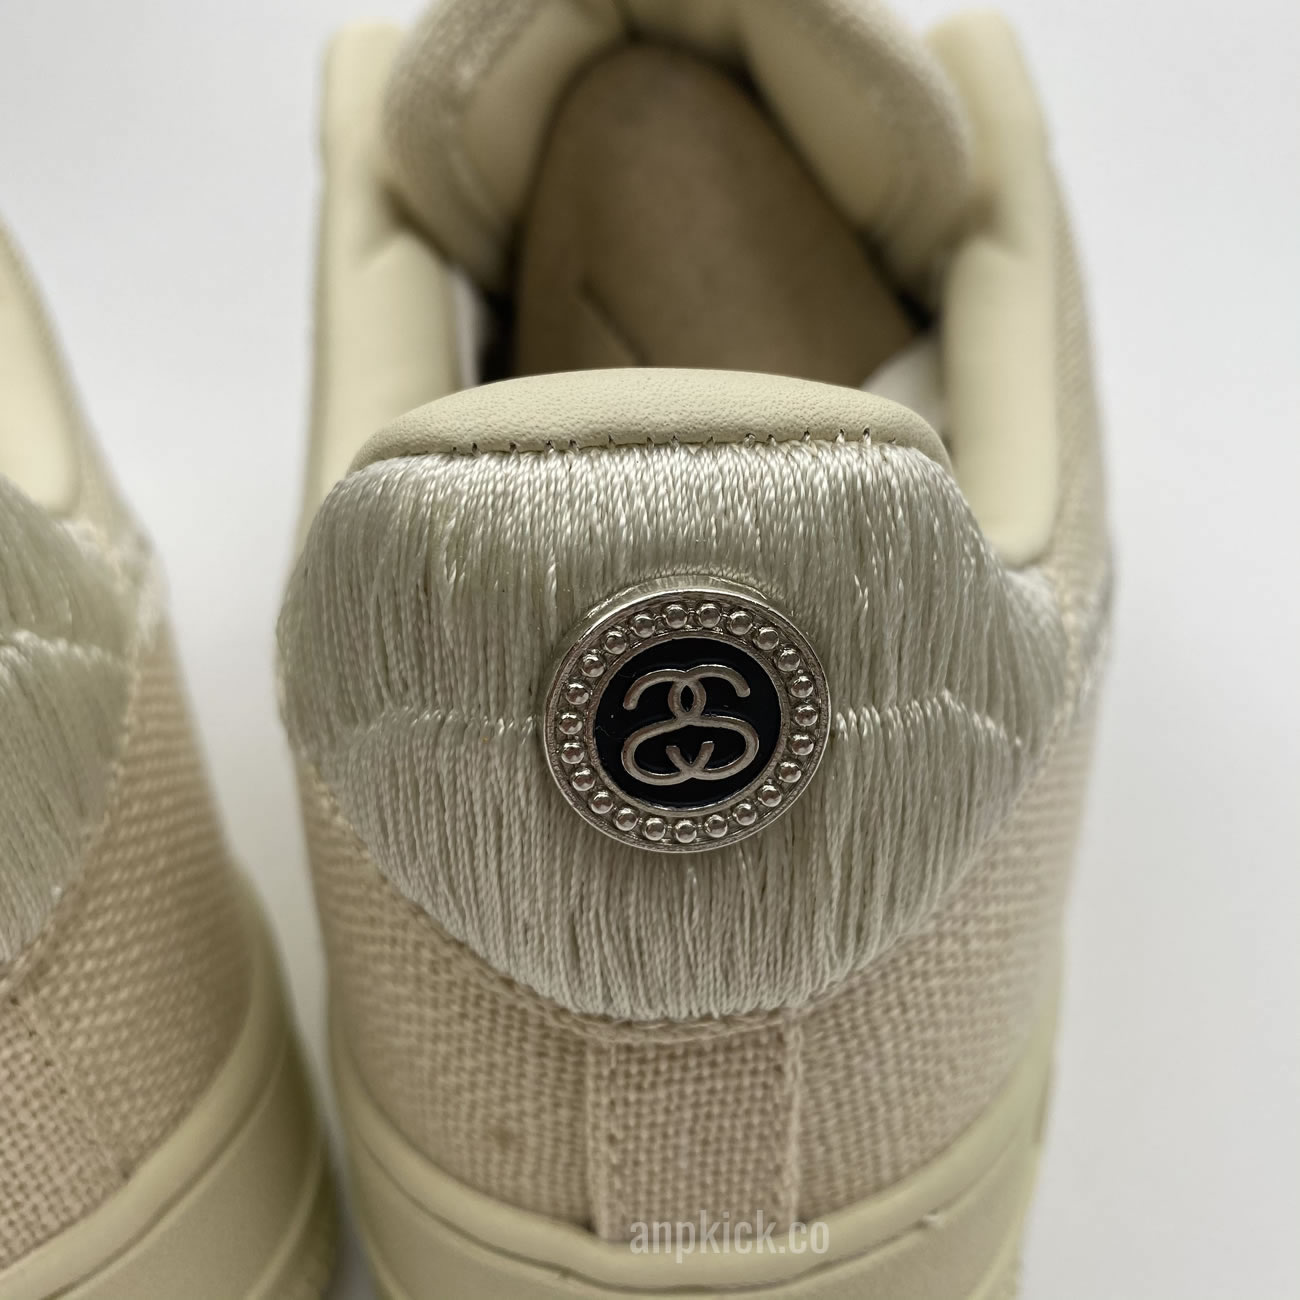 Stussy Nike Air Force 1 Low Fossil Stone Cz9084 200 Release Date (5) - newkick.org